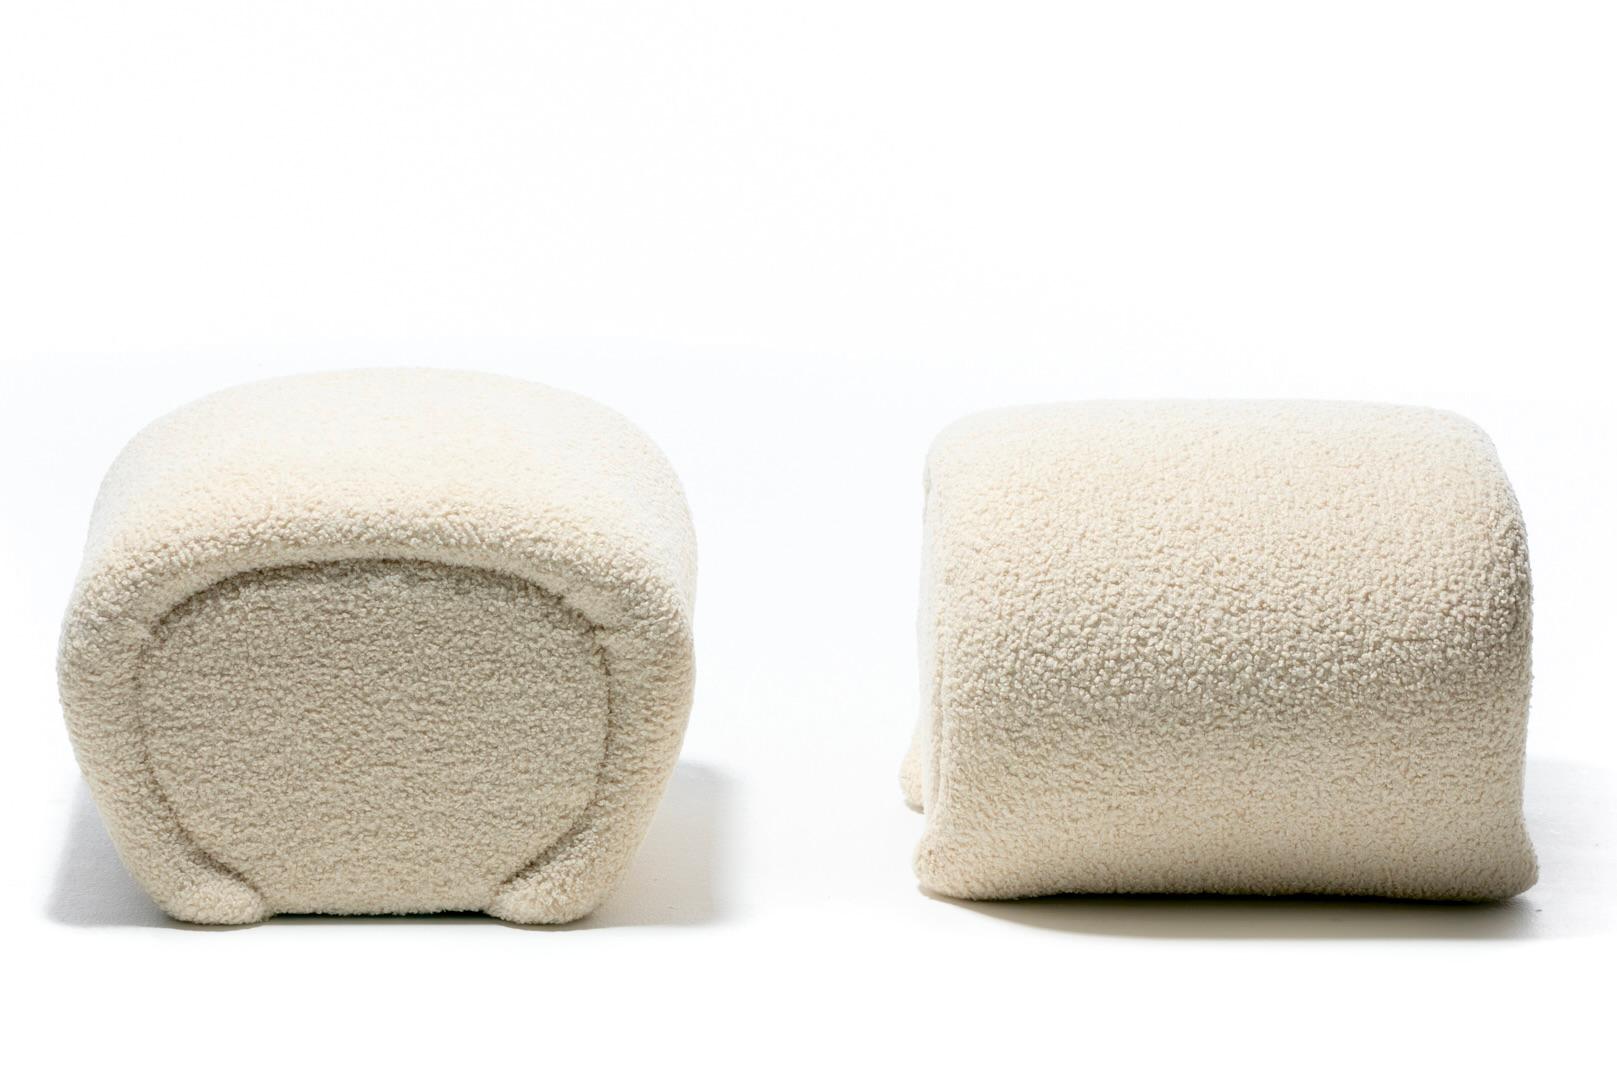 Curvy and soft Post Modern style sculptural ottomans freshly upholstered in plush highly durable ivory bouclé fabric. Reminiscent of Karl Springer's iconic Waterfall Ottomans or Benches, the ottomans' sides curve in a similar waterfall fashion